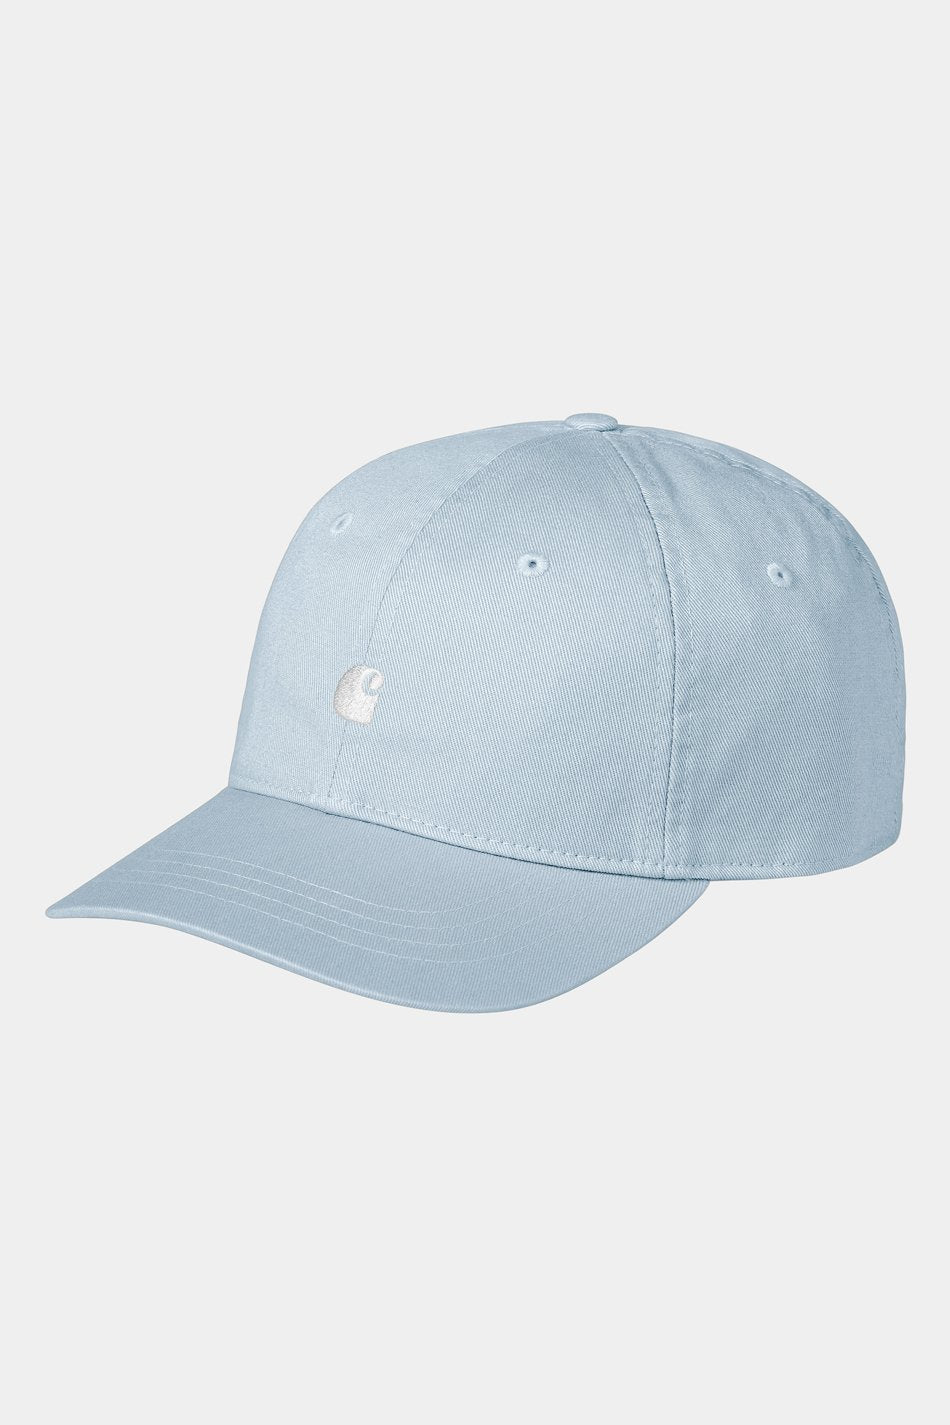 Carhartt WIP Madison Cap Frosted Blue/White